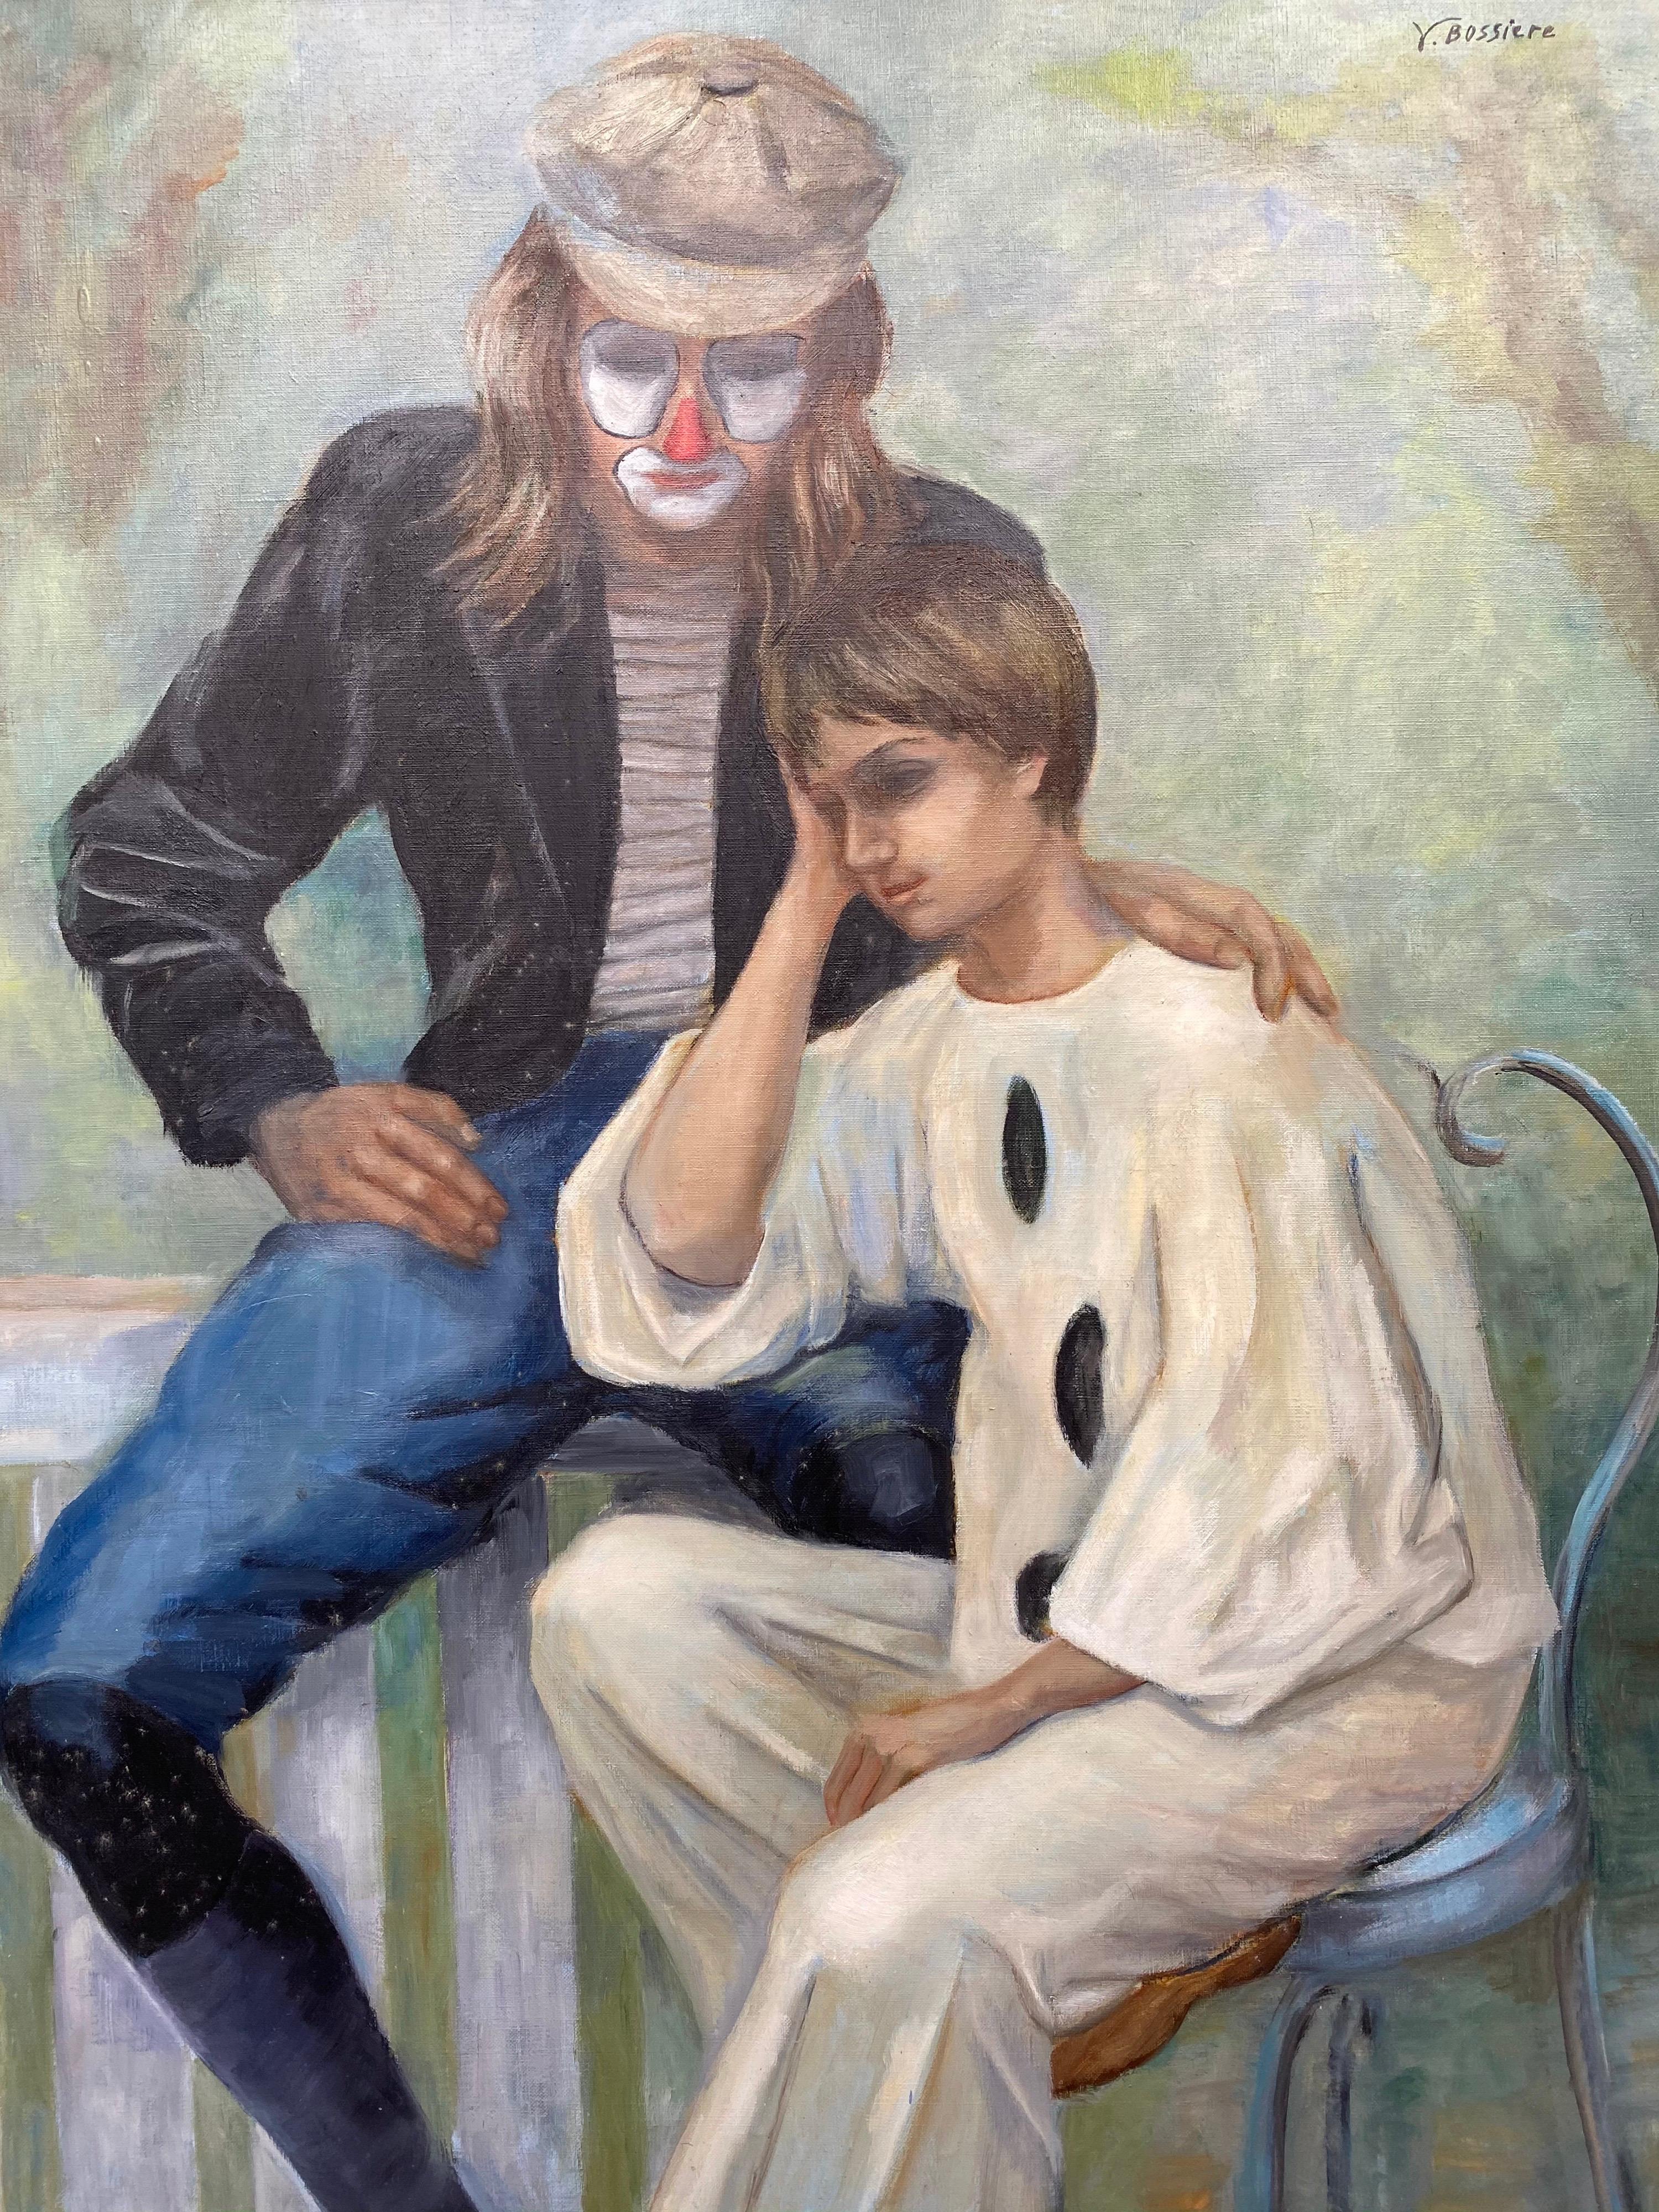 Yvette Bossiere Figurative Painting - Large 20th Century French Impressionist Oil - Two Circus Clowns/ Performers 